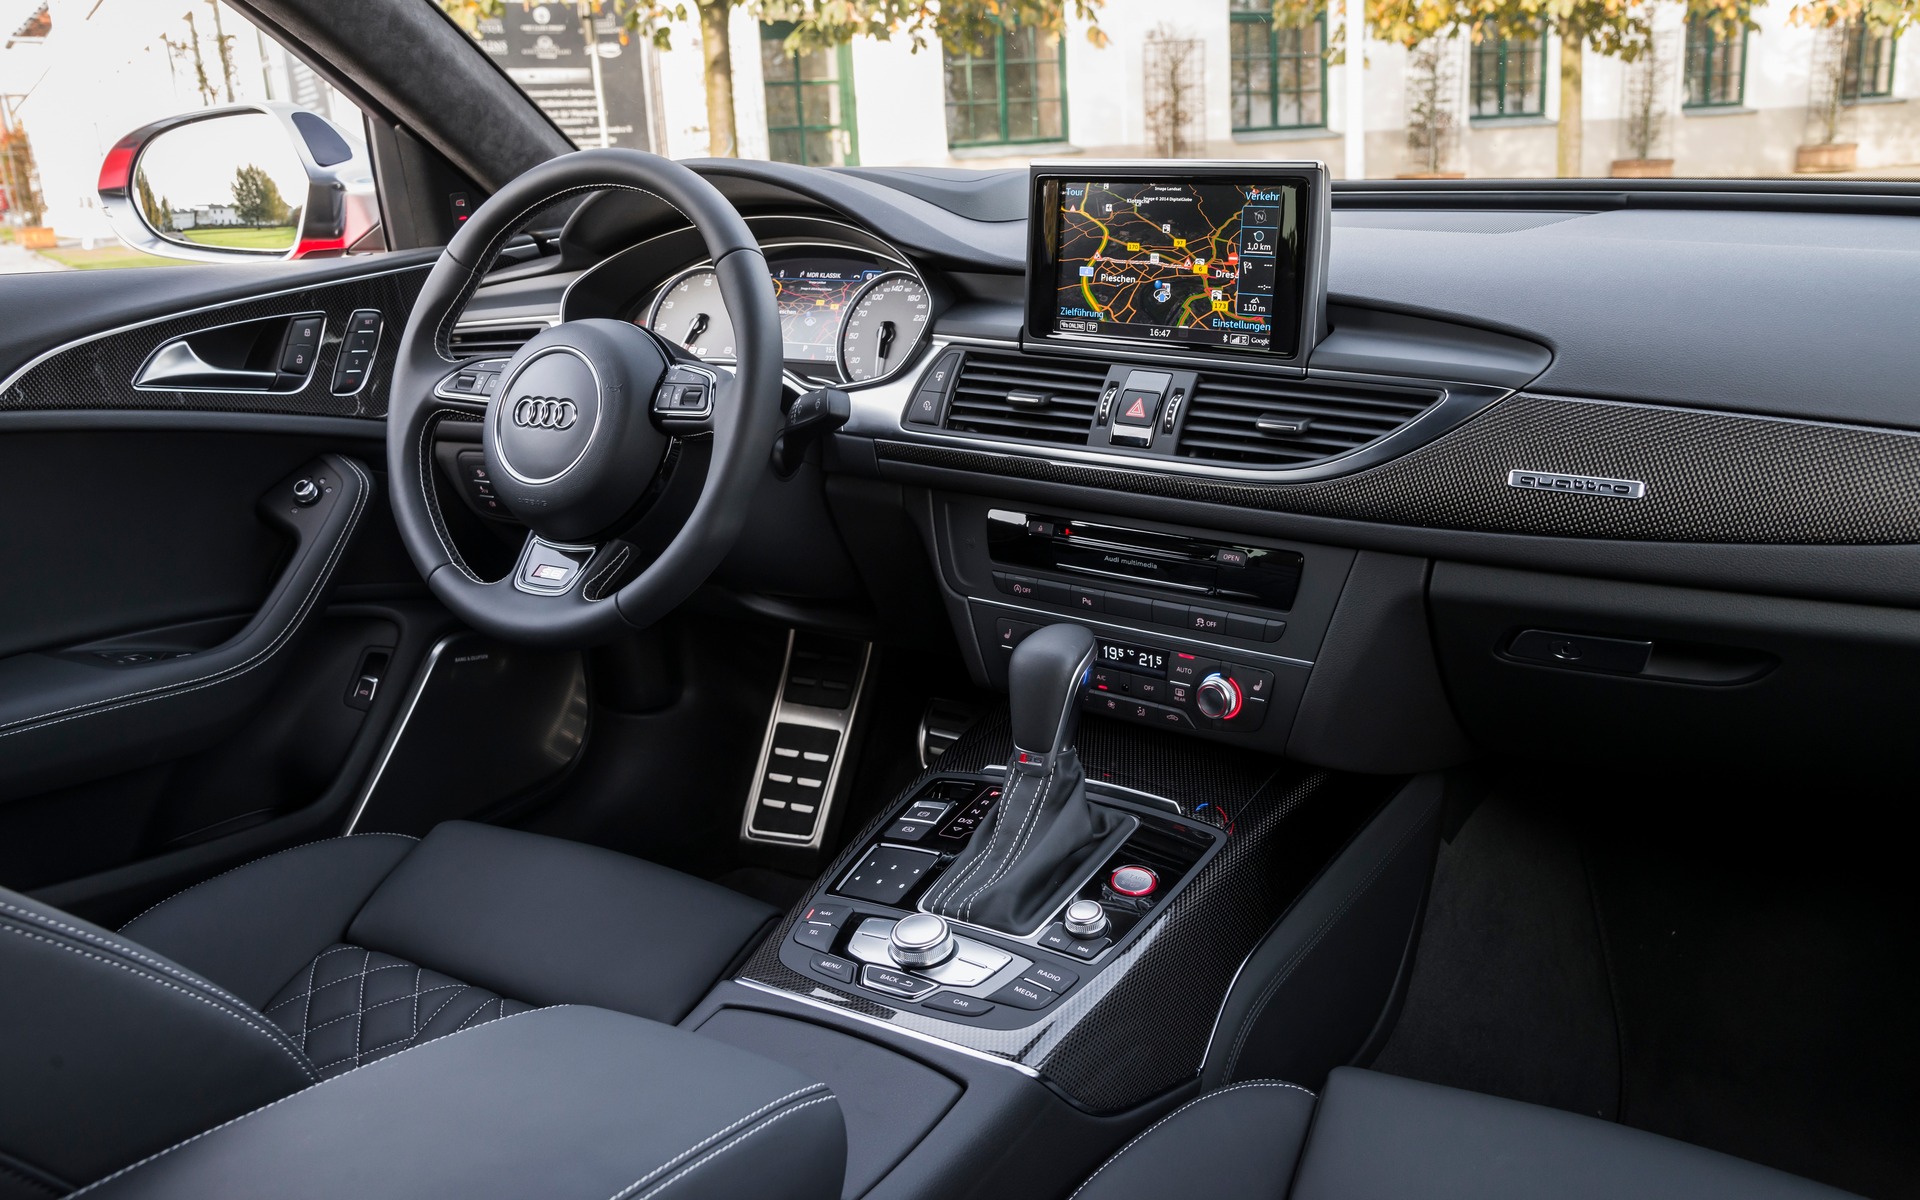 The interior of the A6 makes use of neutral tones and wood accents.